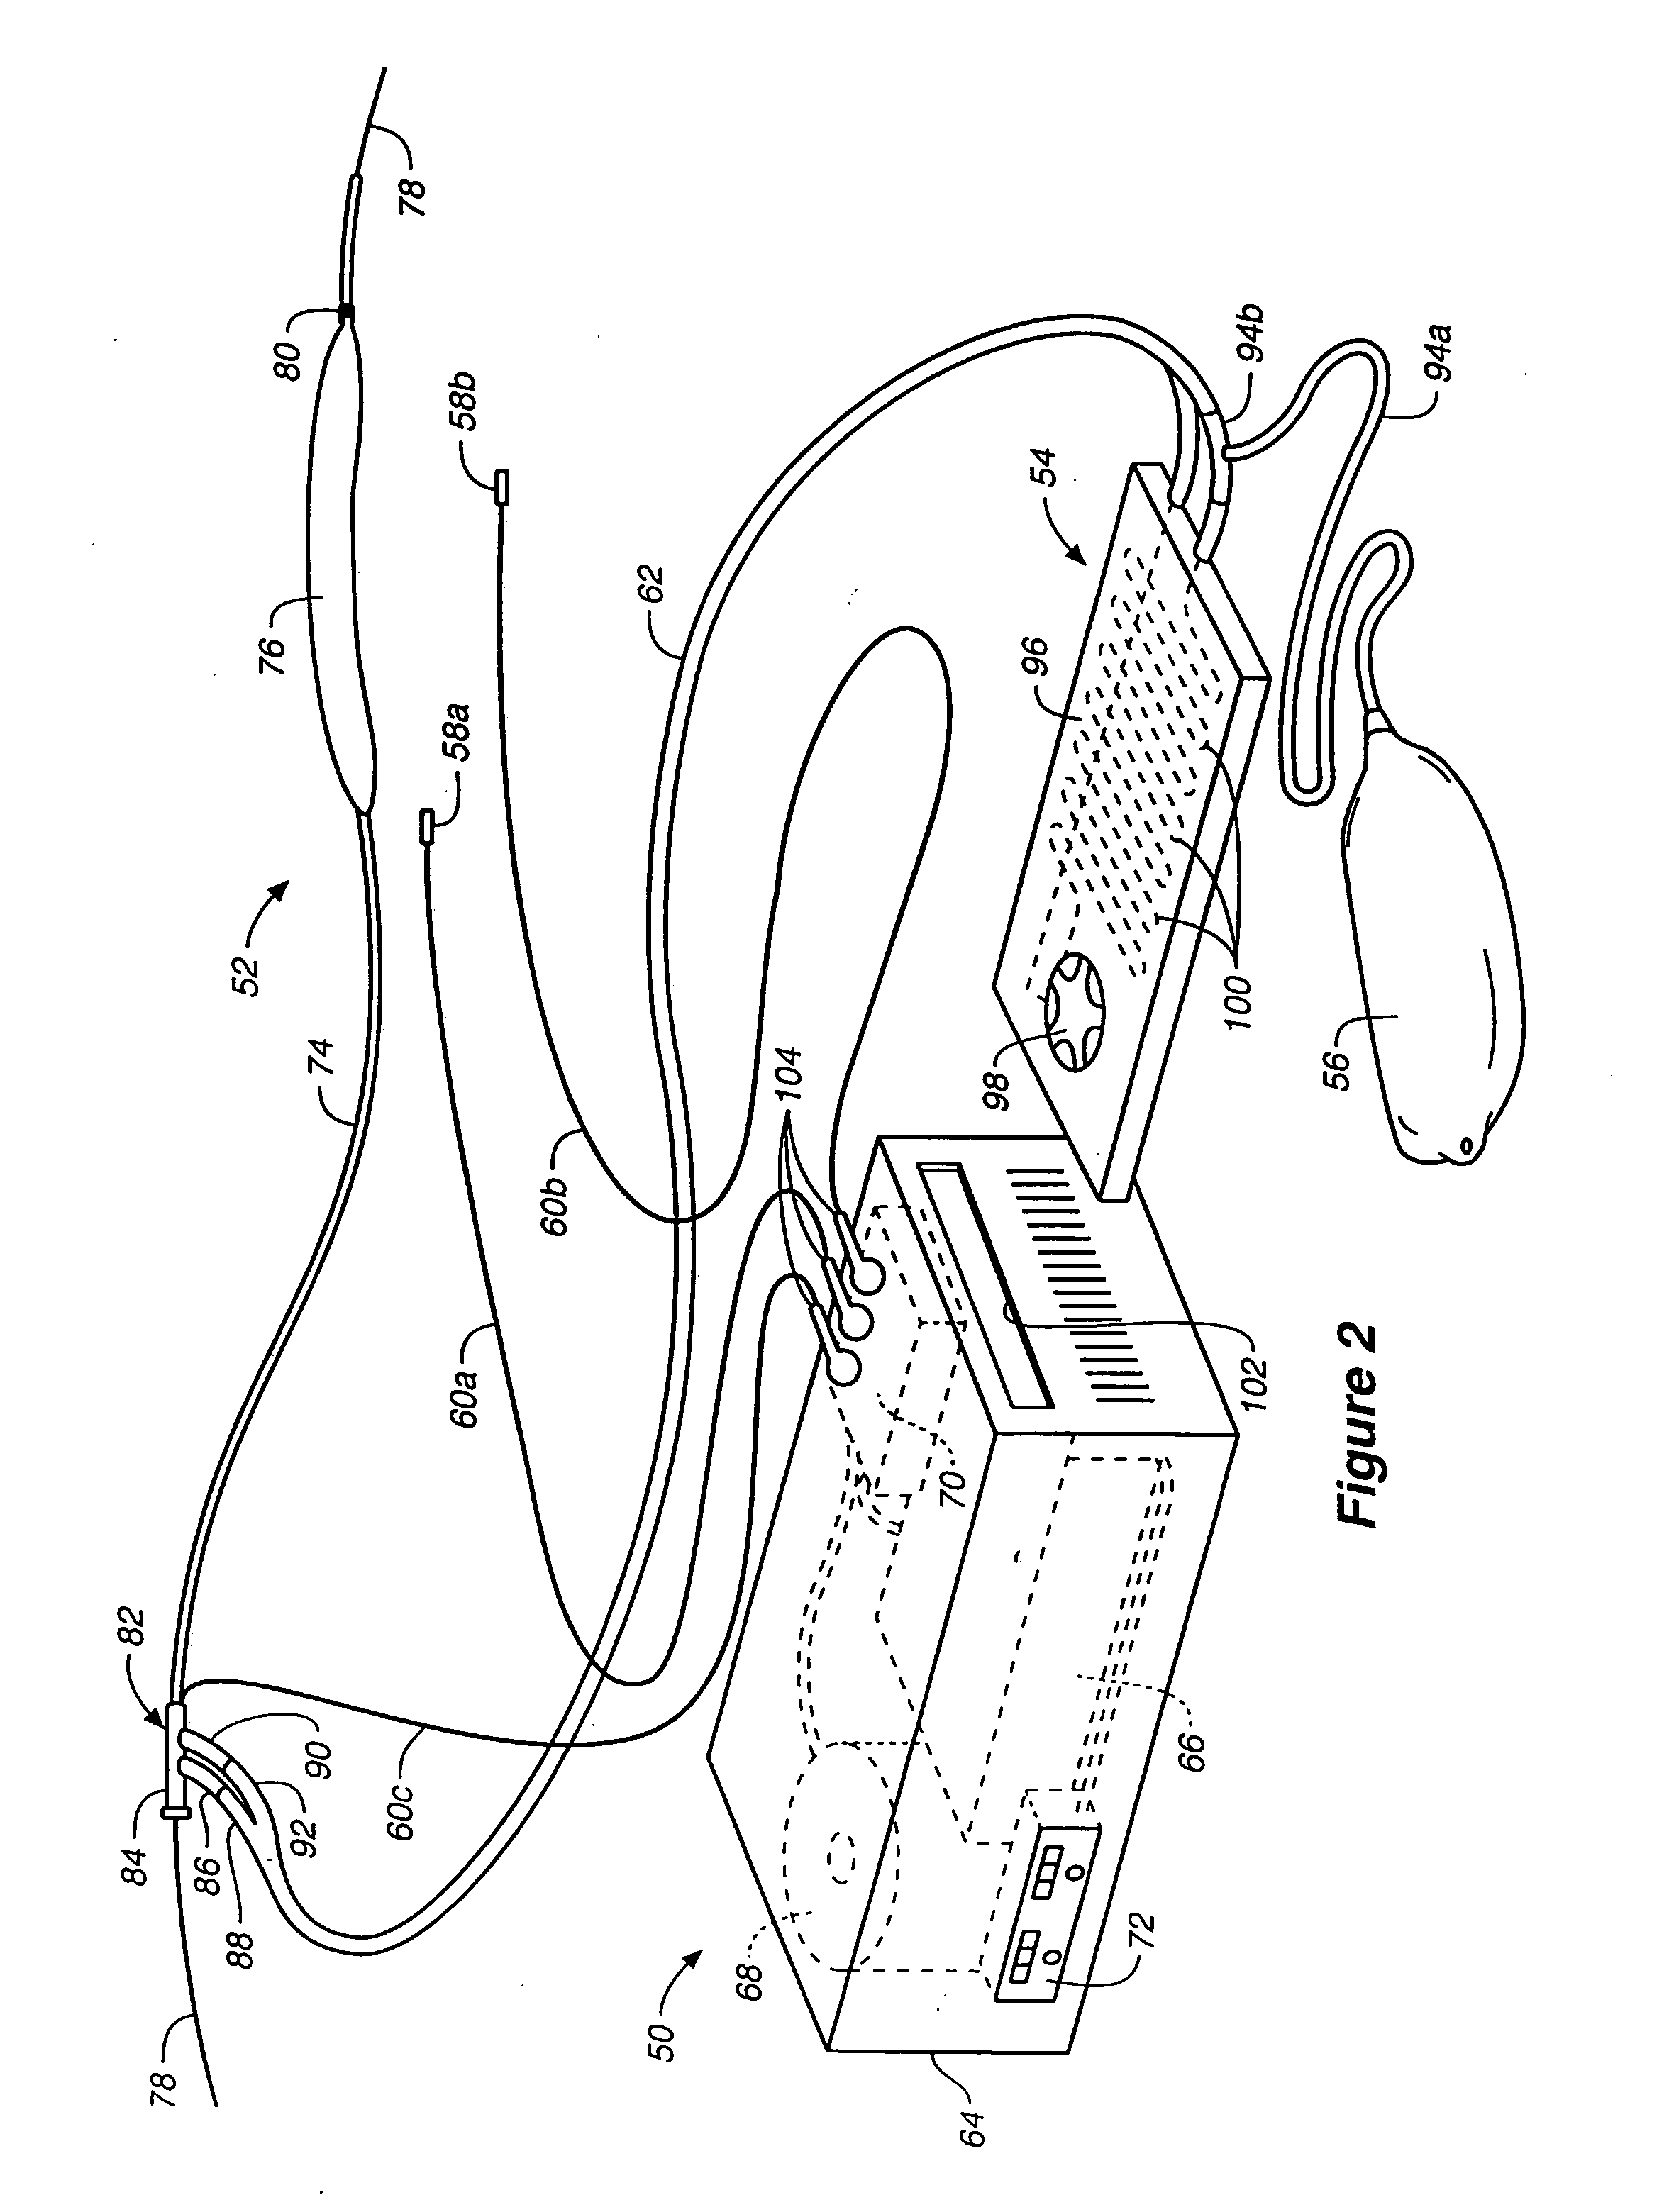 Method and system for control of a patient's body temperature by way of a transluminally insertable heat exchange catheter